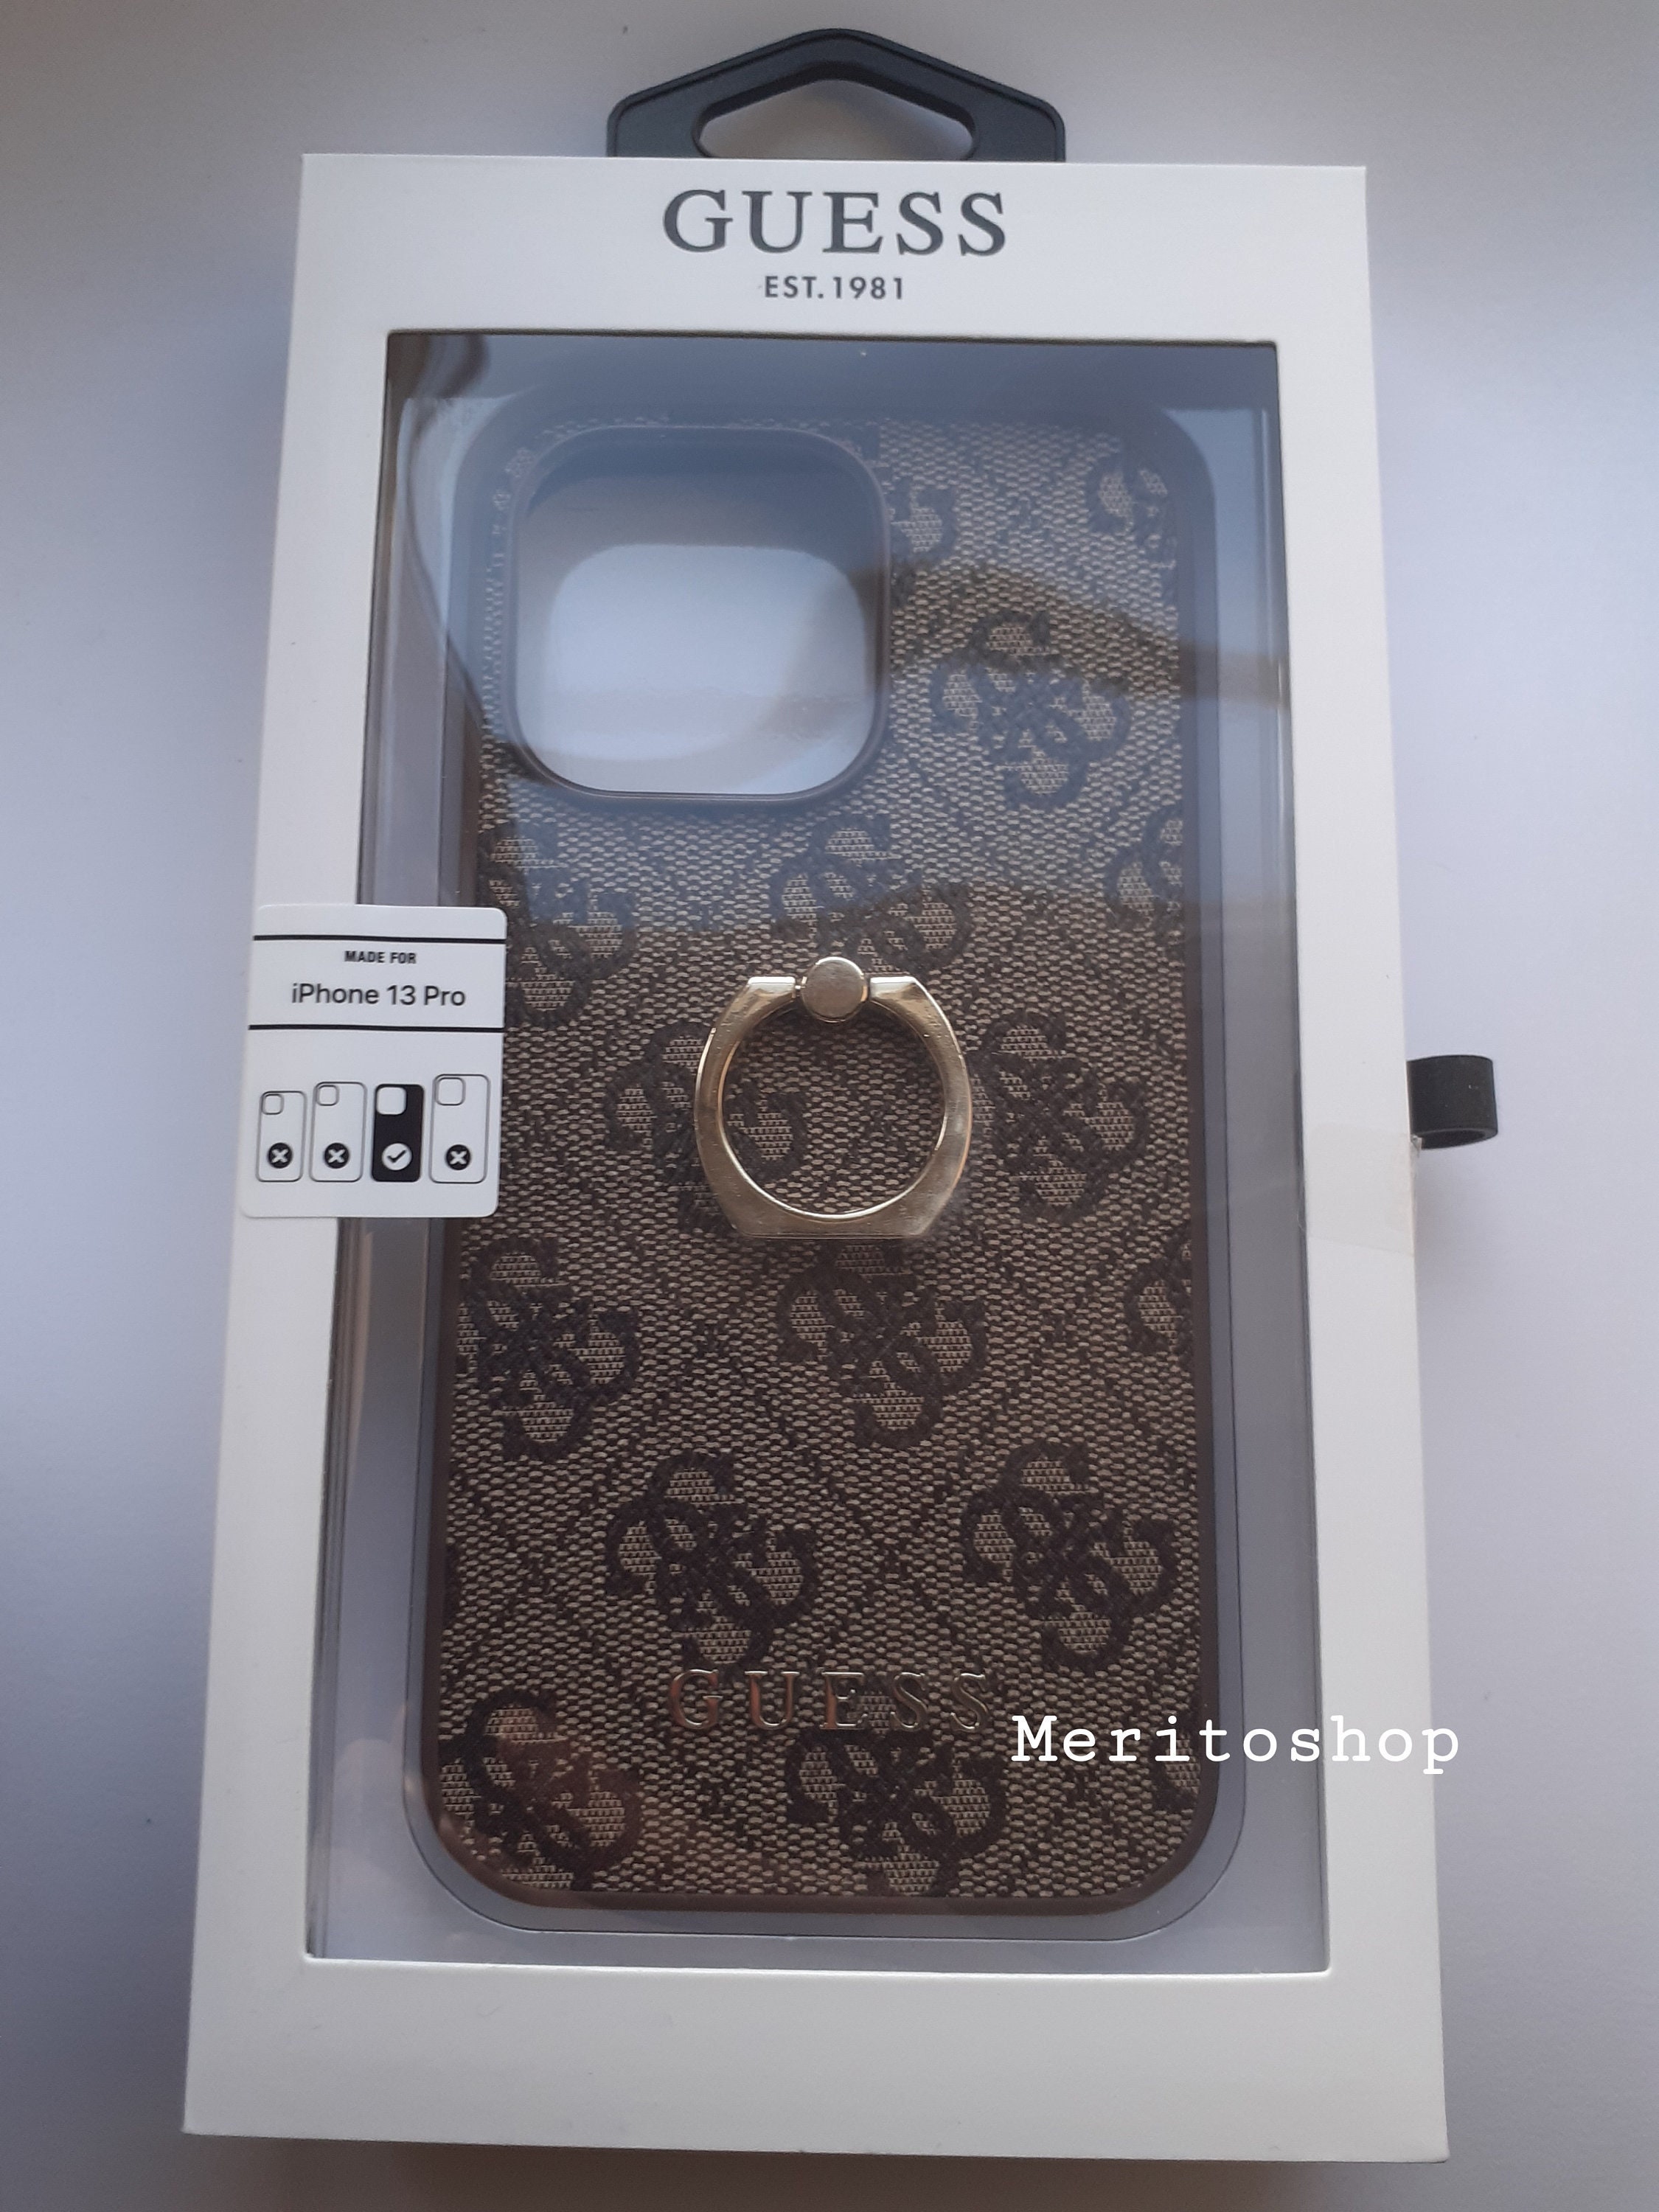 Case Protector GUESS charm para iPhone 12 Pro MAX - FASHIONCEL